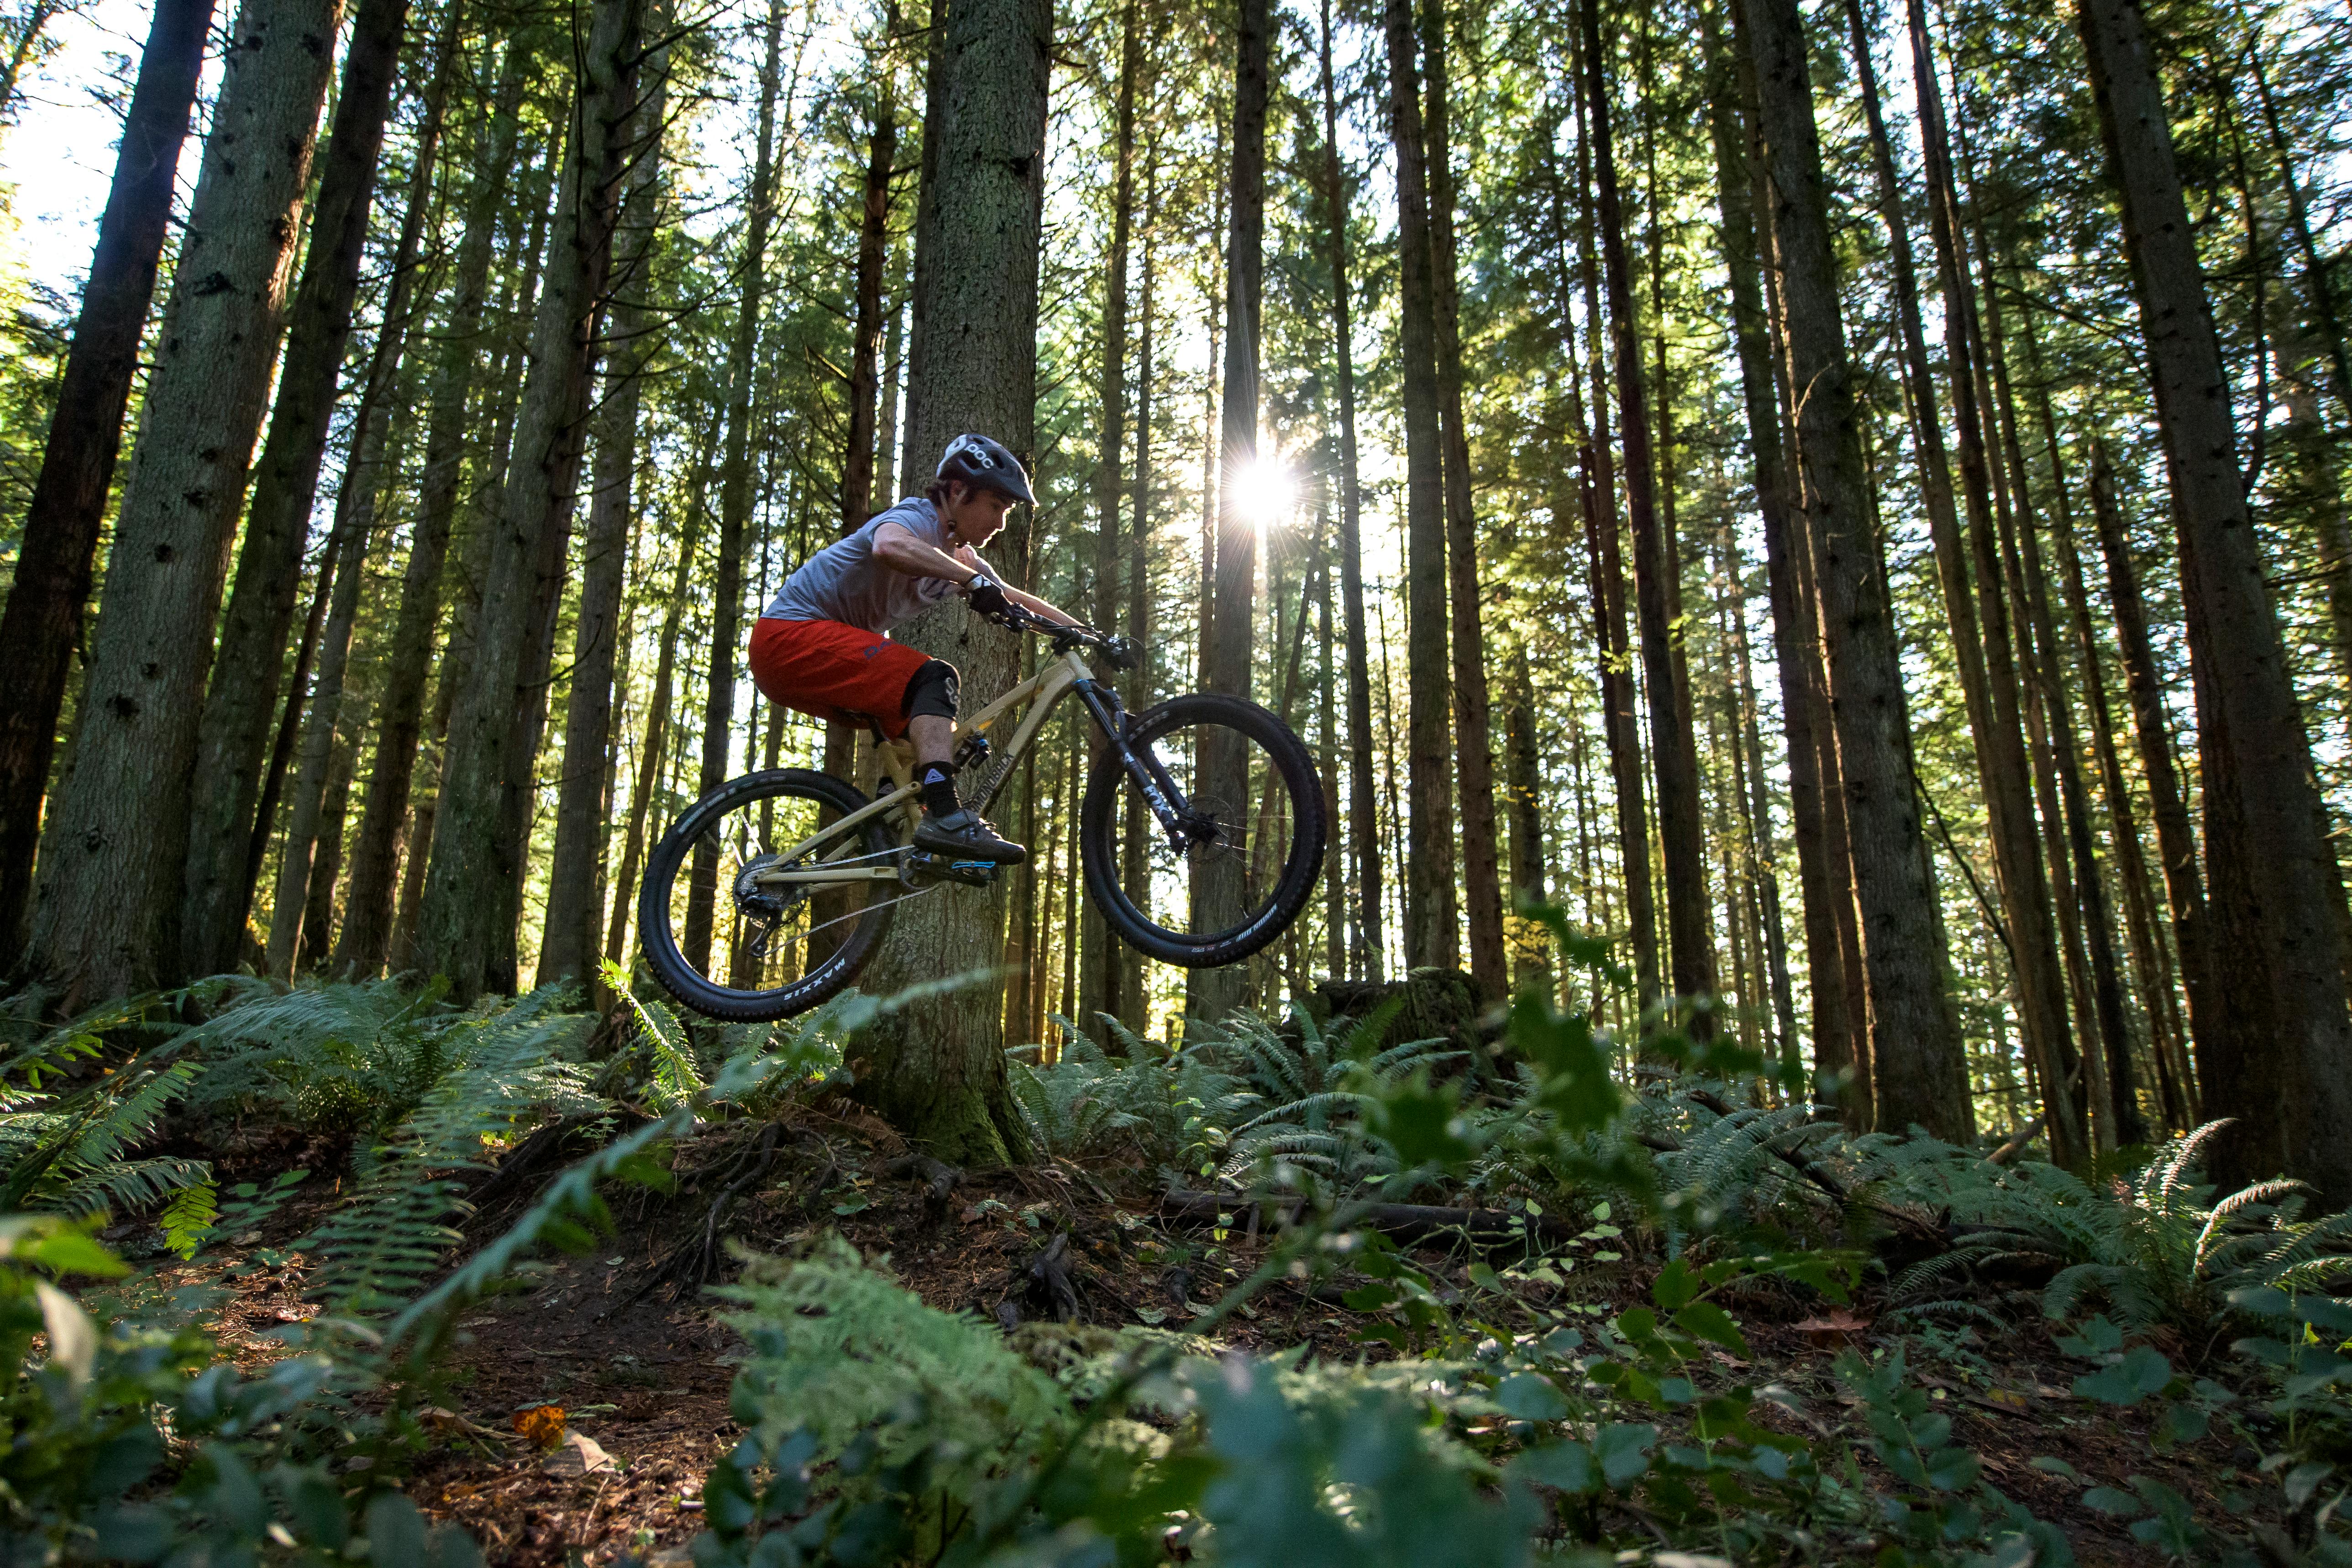 Man airborne on his Diamondback mountain bike after launching off a jump in the forest. The sun shines through the trees.